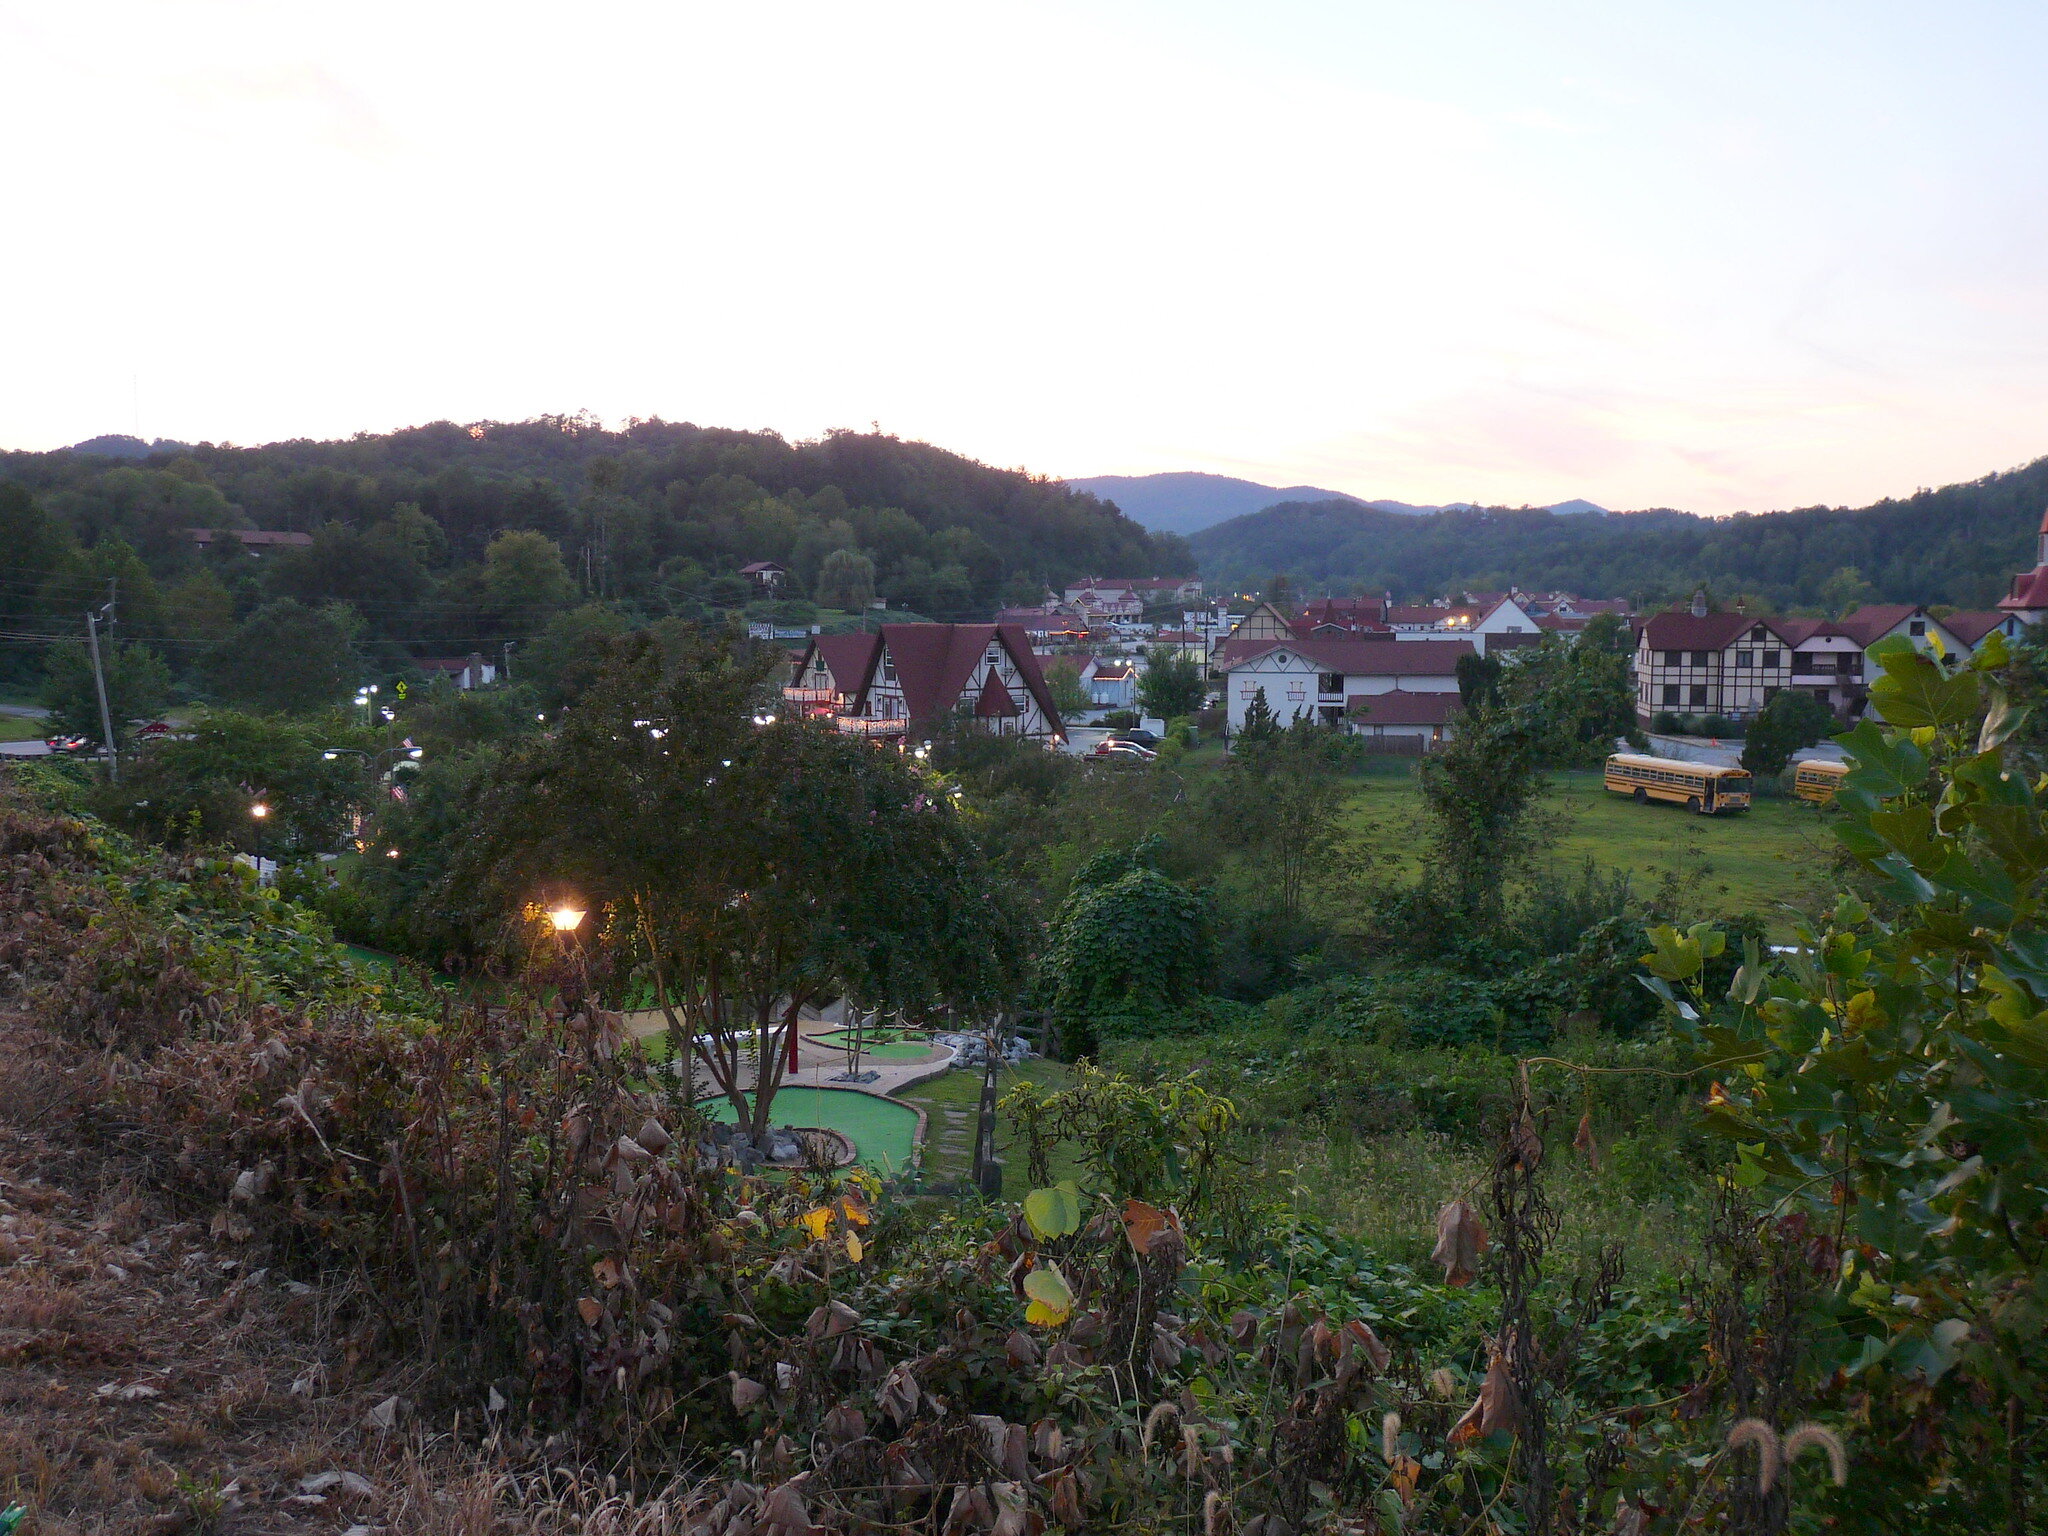 View of the Bavarian-style village in Helen, GA